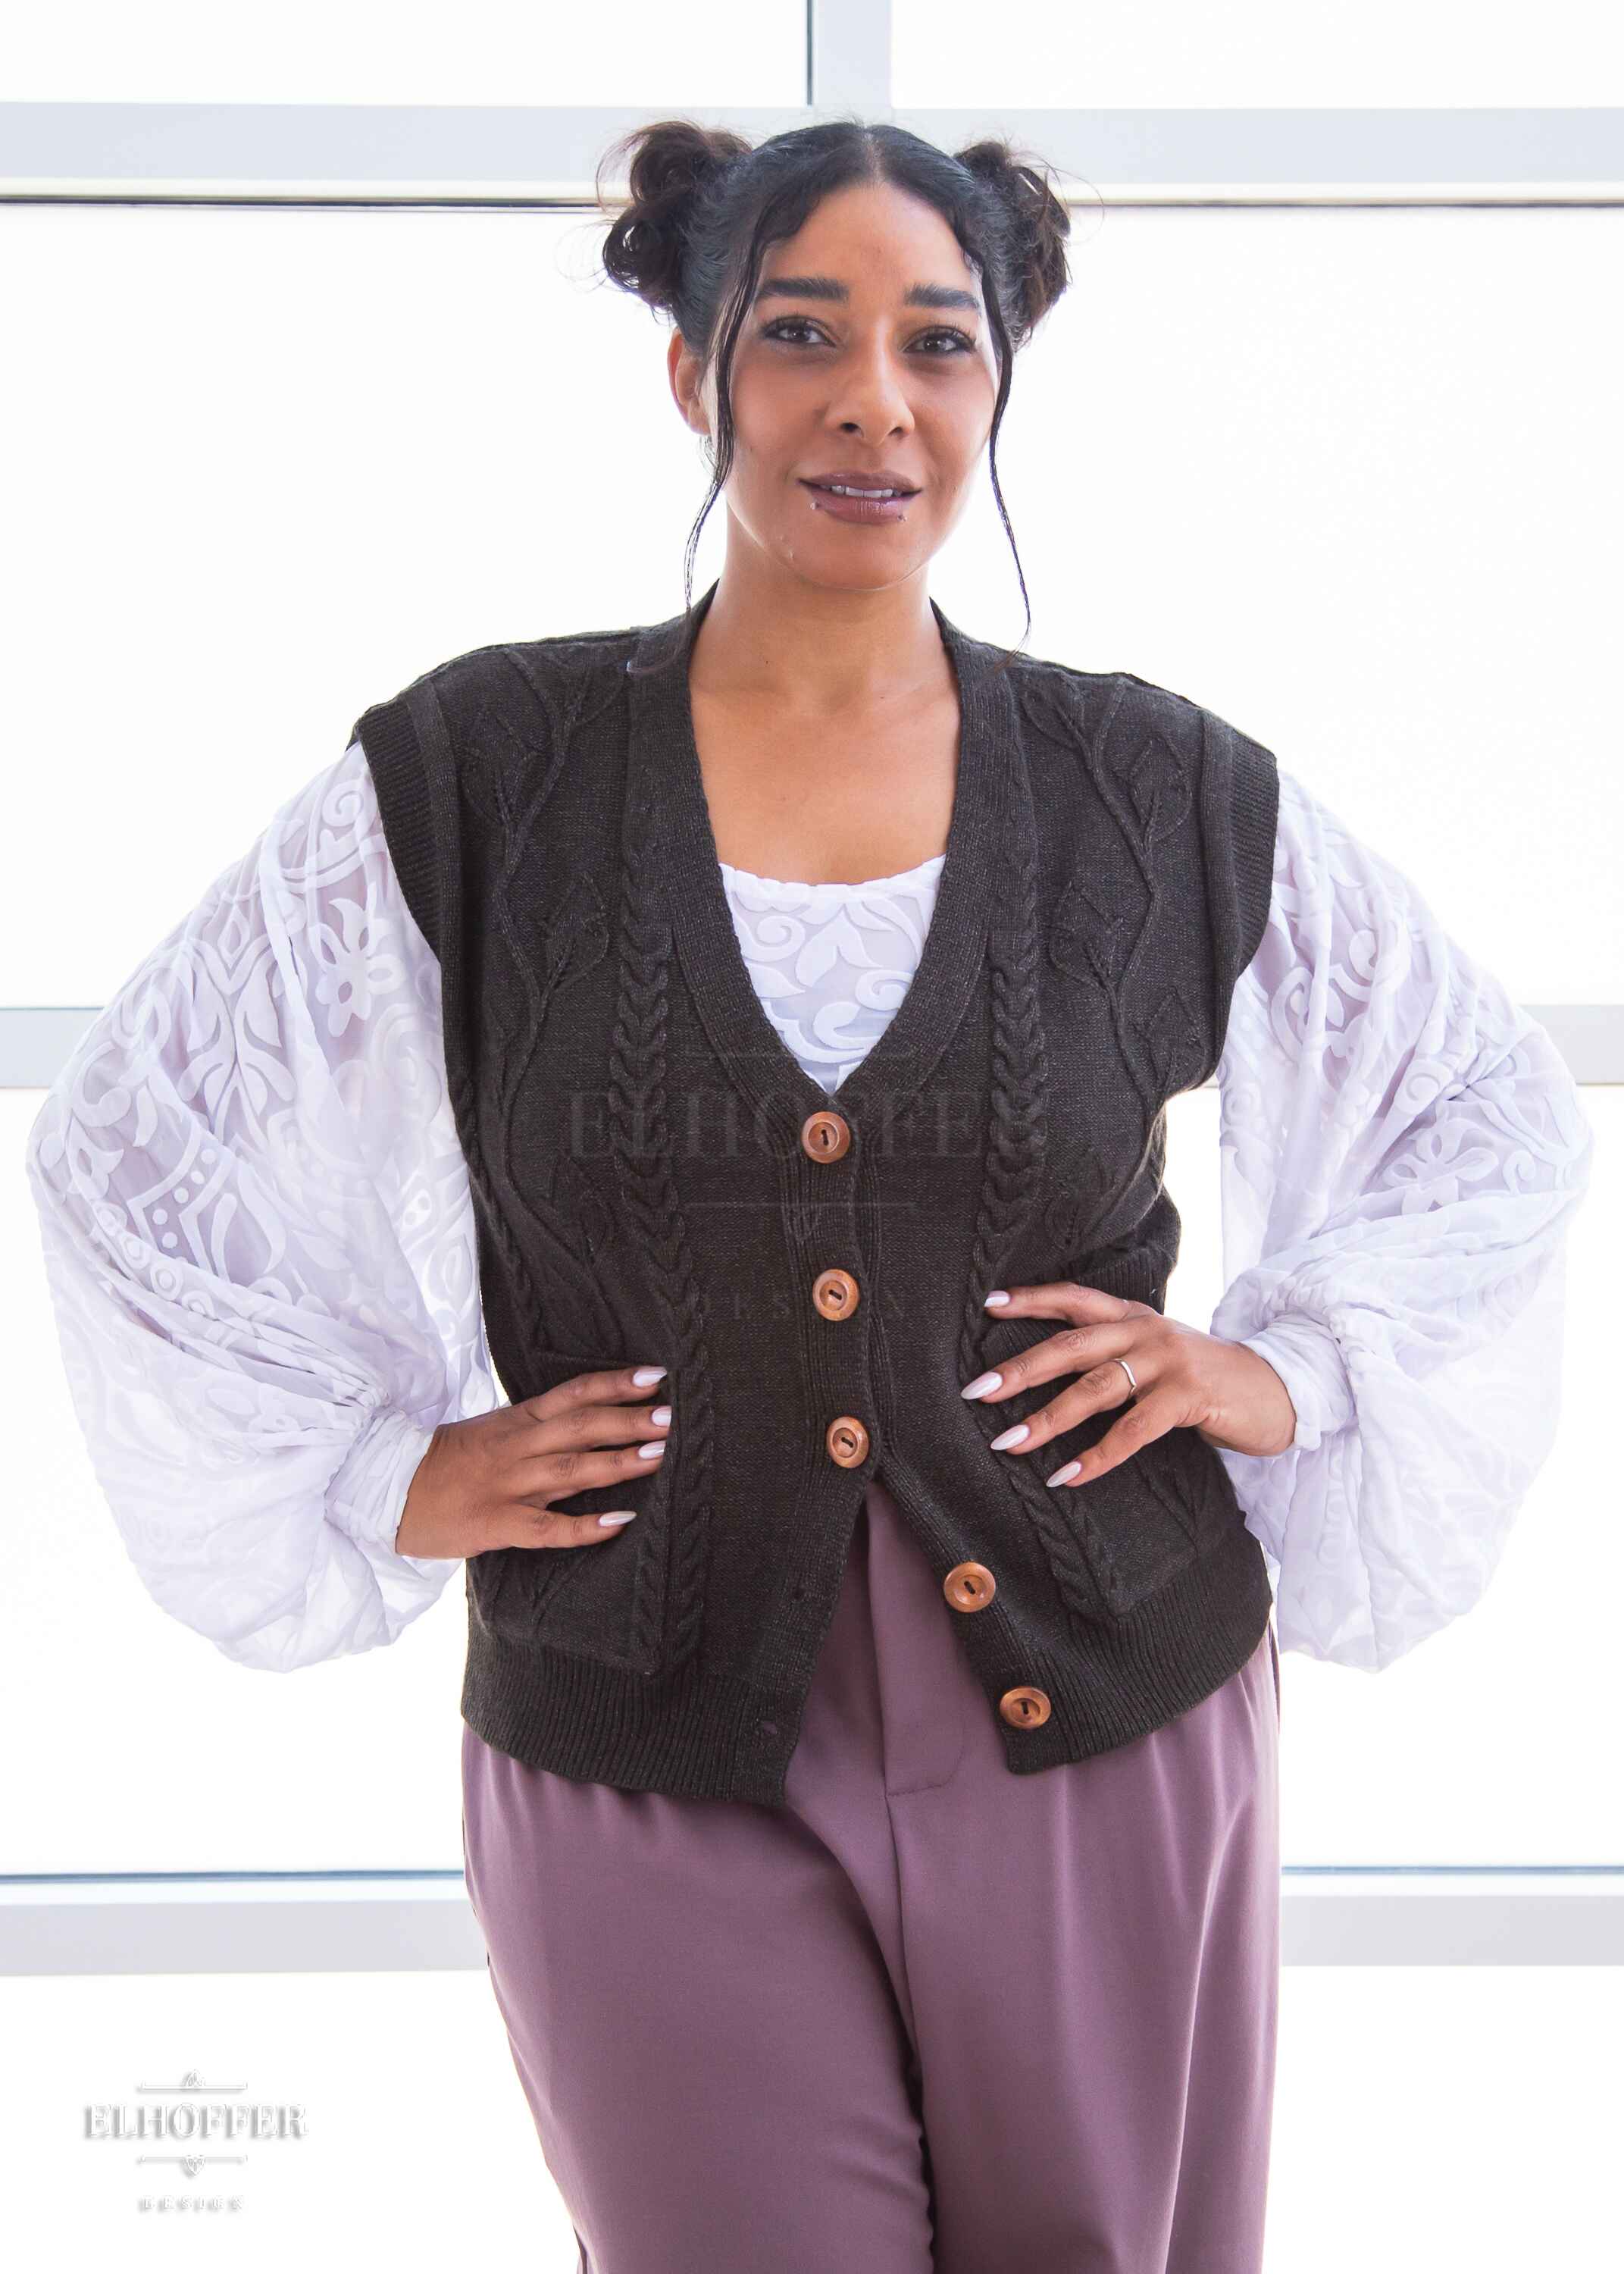 Janae, a light brown skinned L model with dark hair in space buns, is wearing the M (L-2XL) sample of a dark grey button up knit vest with a leafy vine and cable knit pattern, light brown buttons, and front pockets over a white long sleeve burnout velvet top with billowing sleeves and mauve pleated trousers.